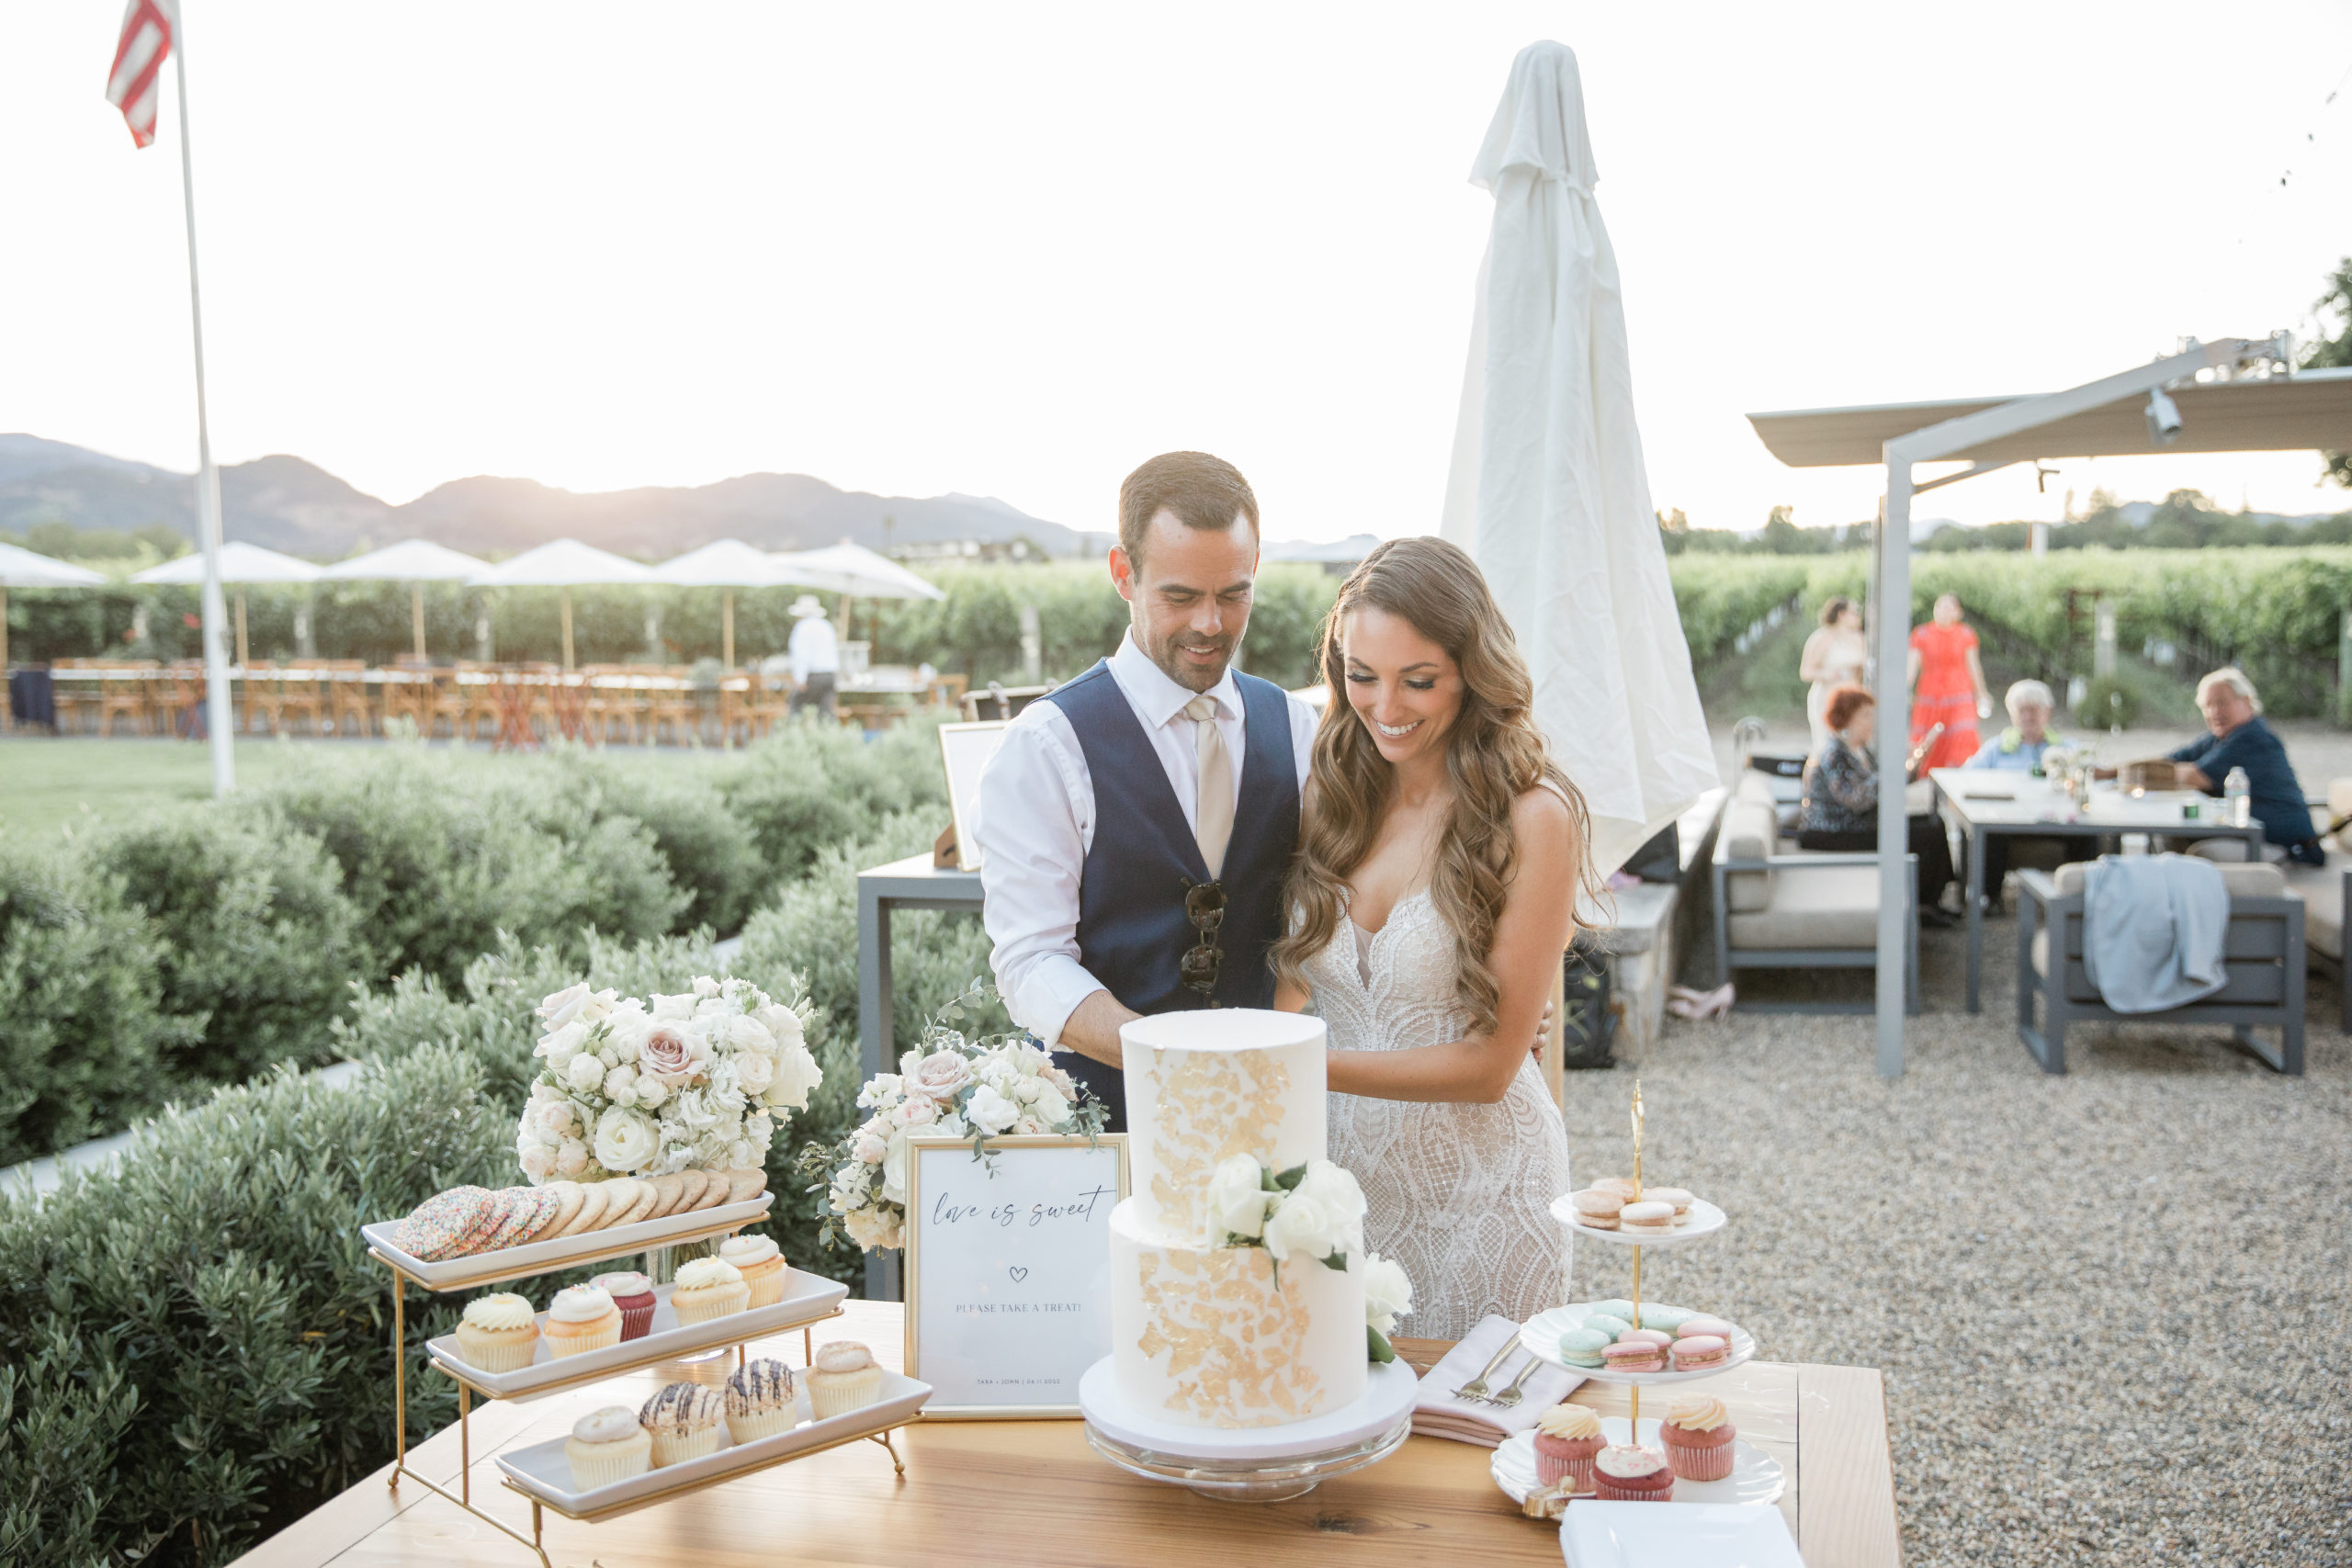 Tara and John cutting their wedding cake at a dessert table with bushes and vineyards in the background.